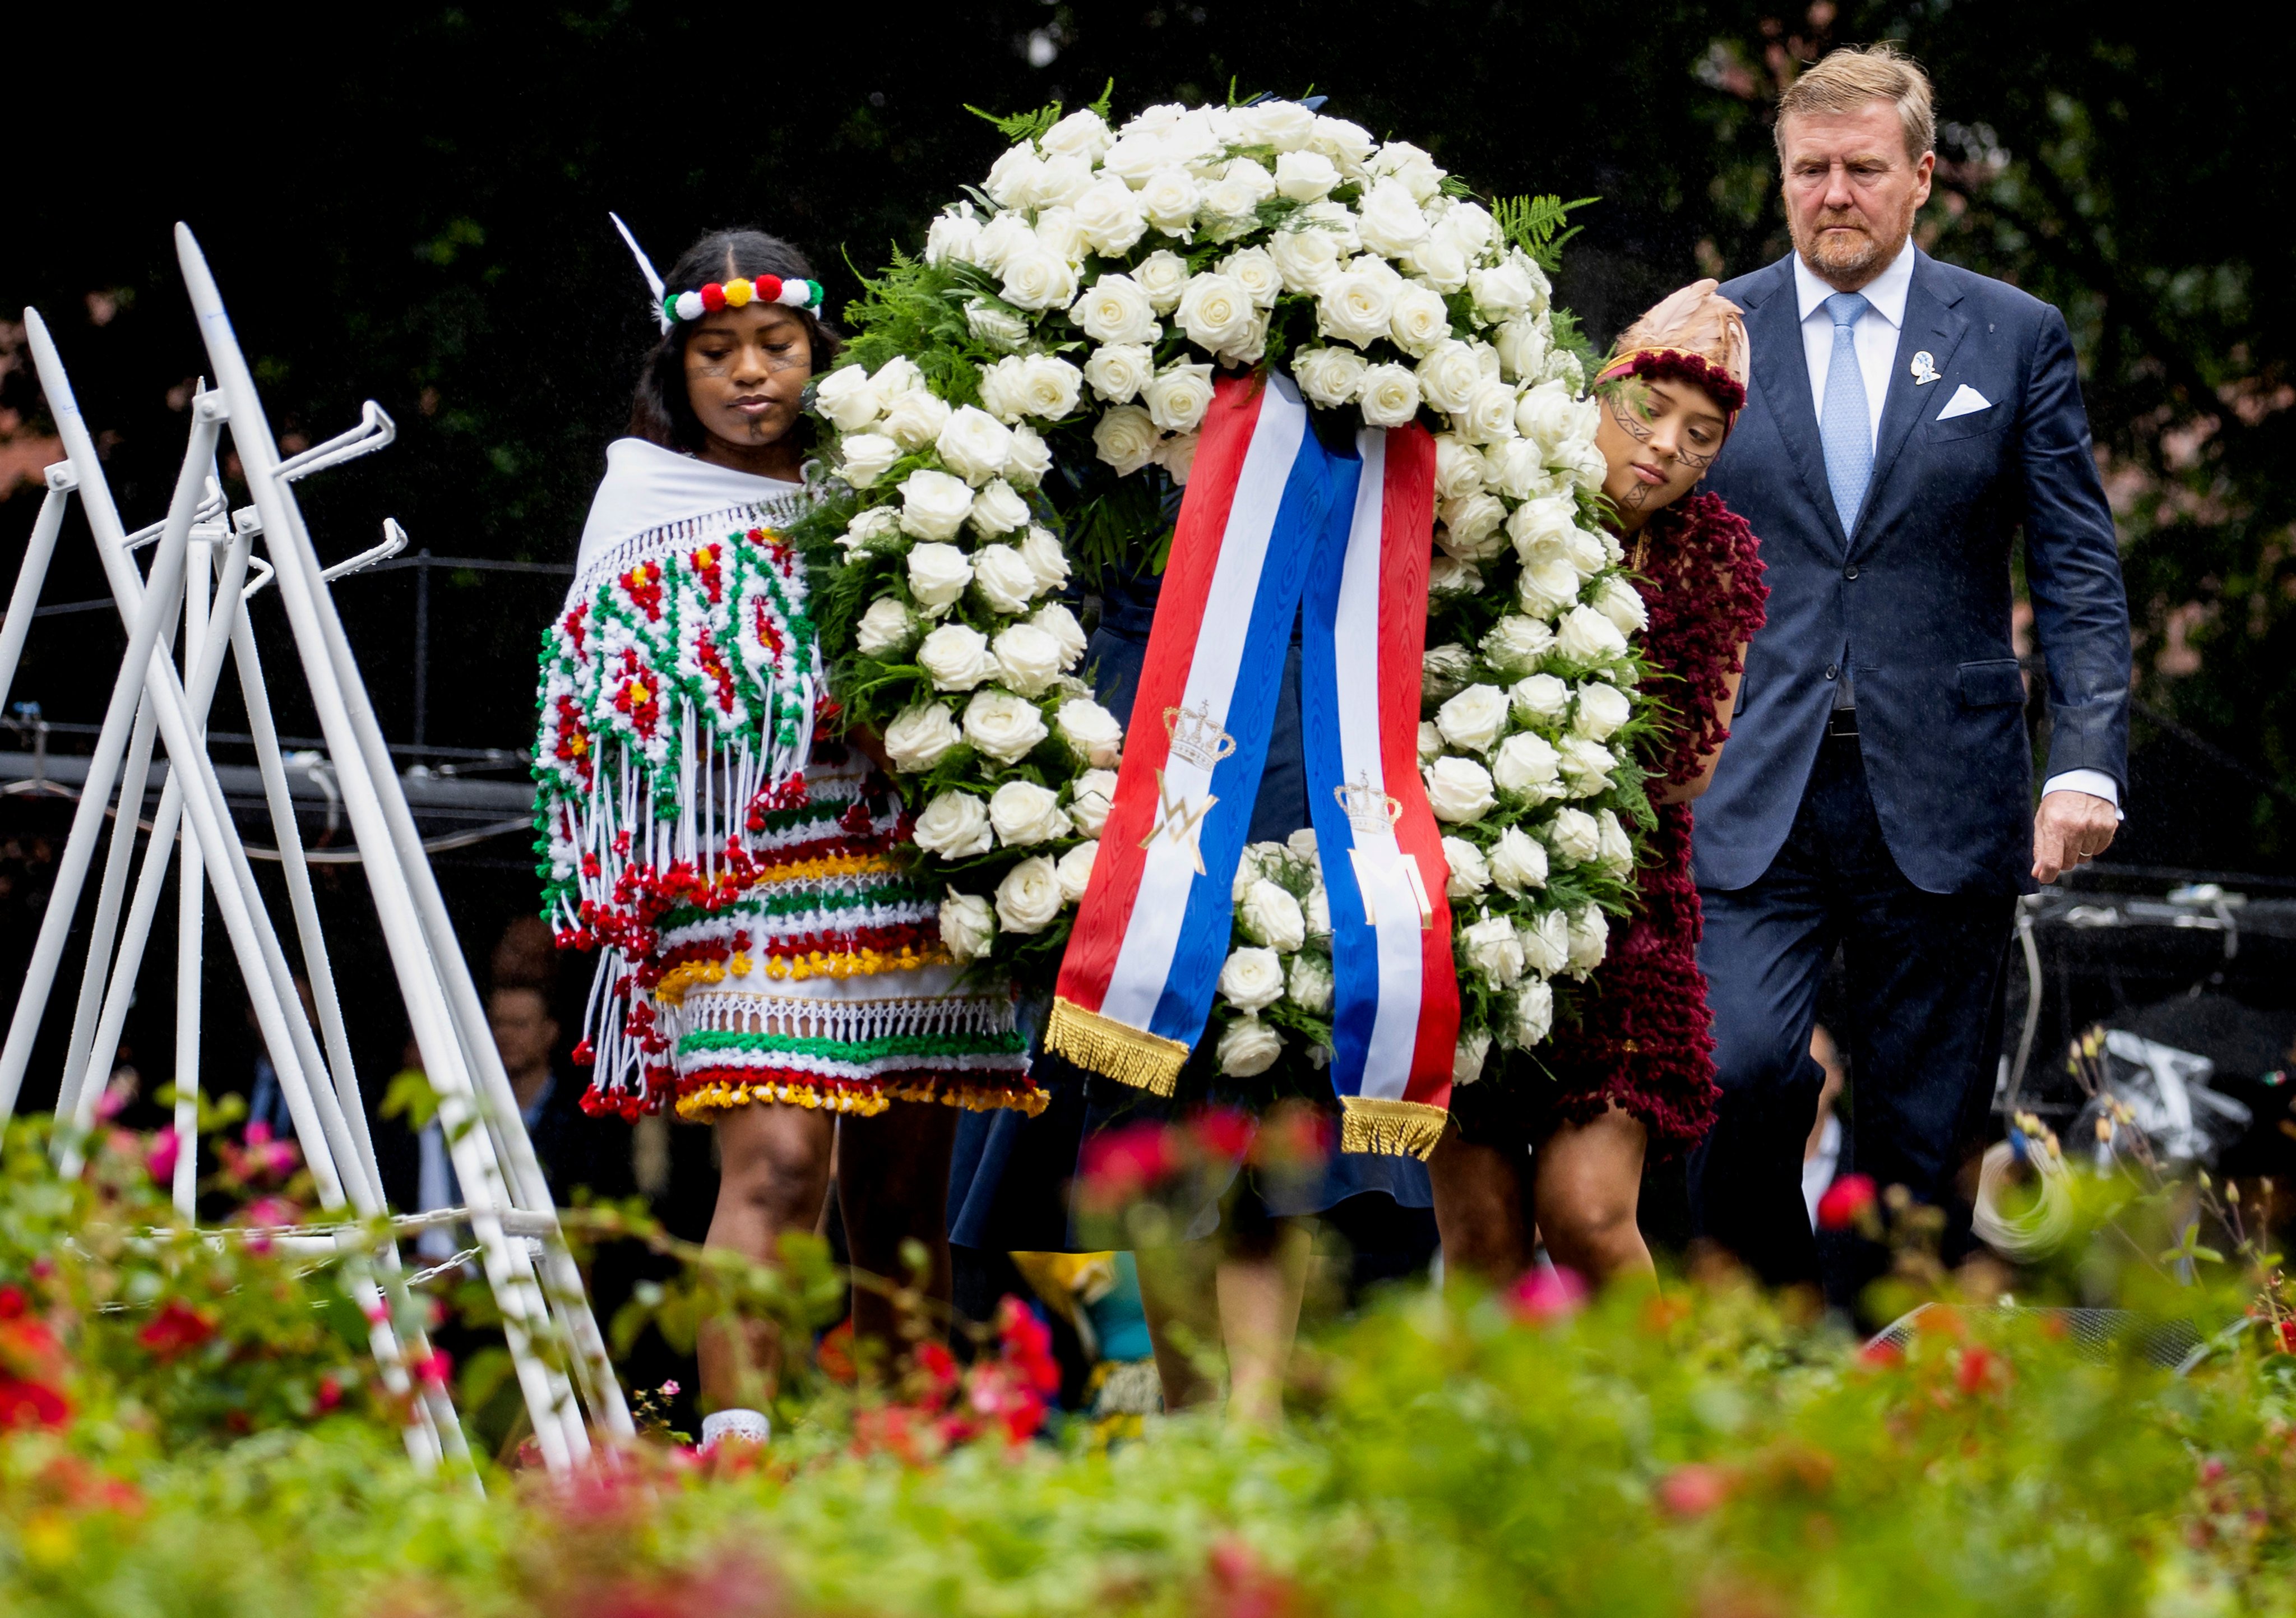 Dutch King Willem-Alexander lays a wreath at the slavery monument after apologising for the royal house’s role in slavery, in Amsterdam, Netherlands on Saturday. Photo: Pool Photo via AP